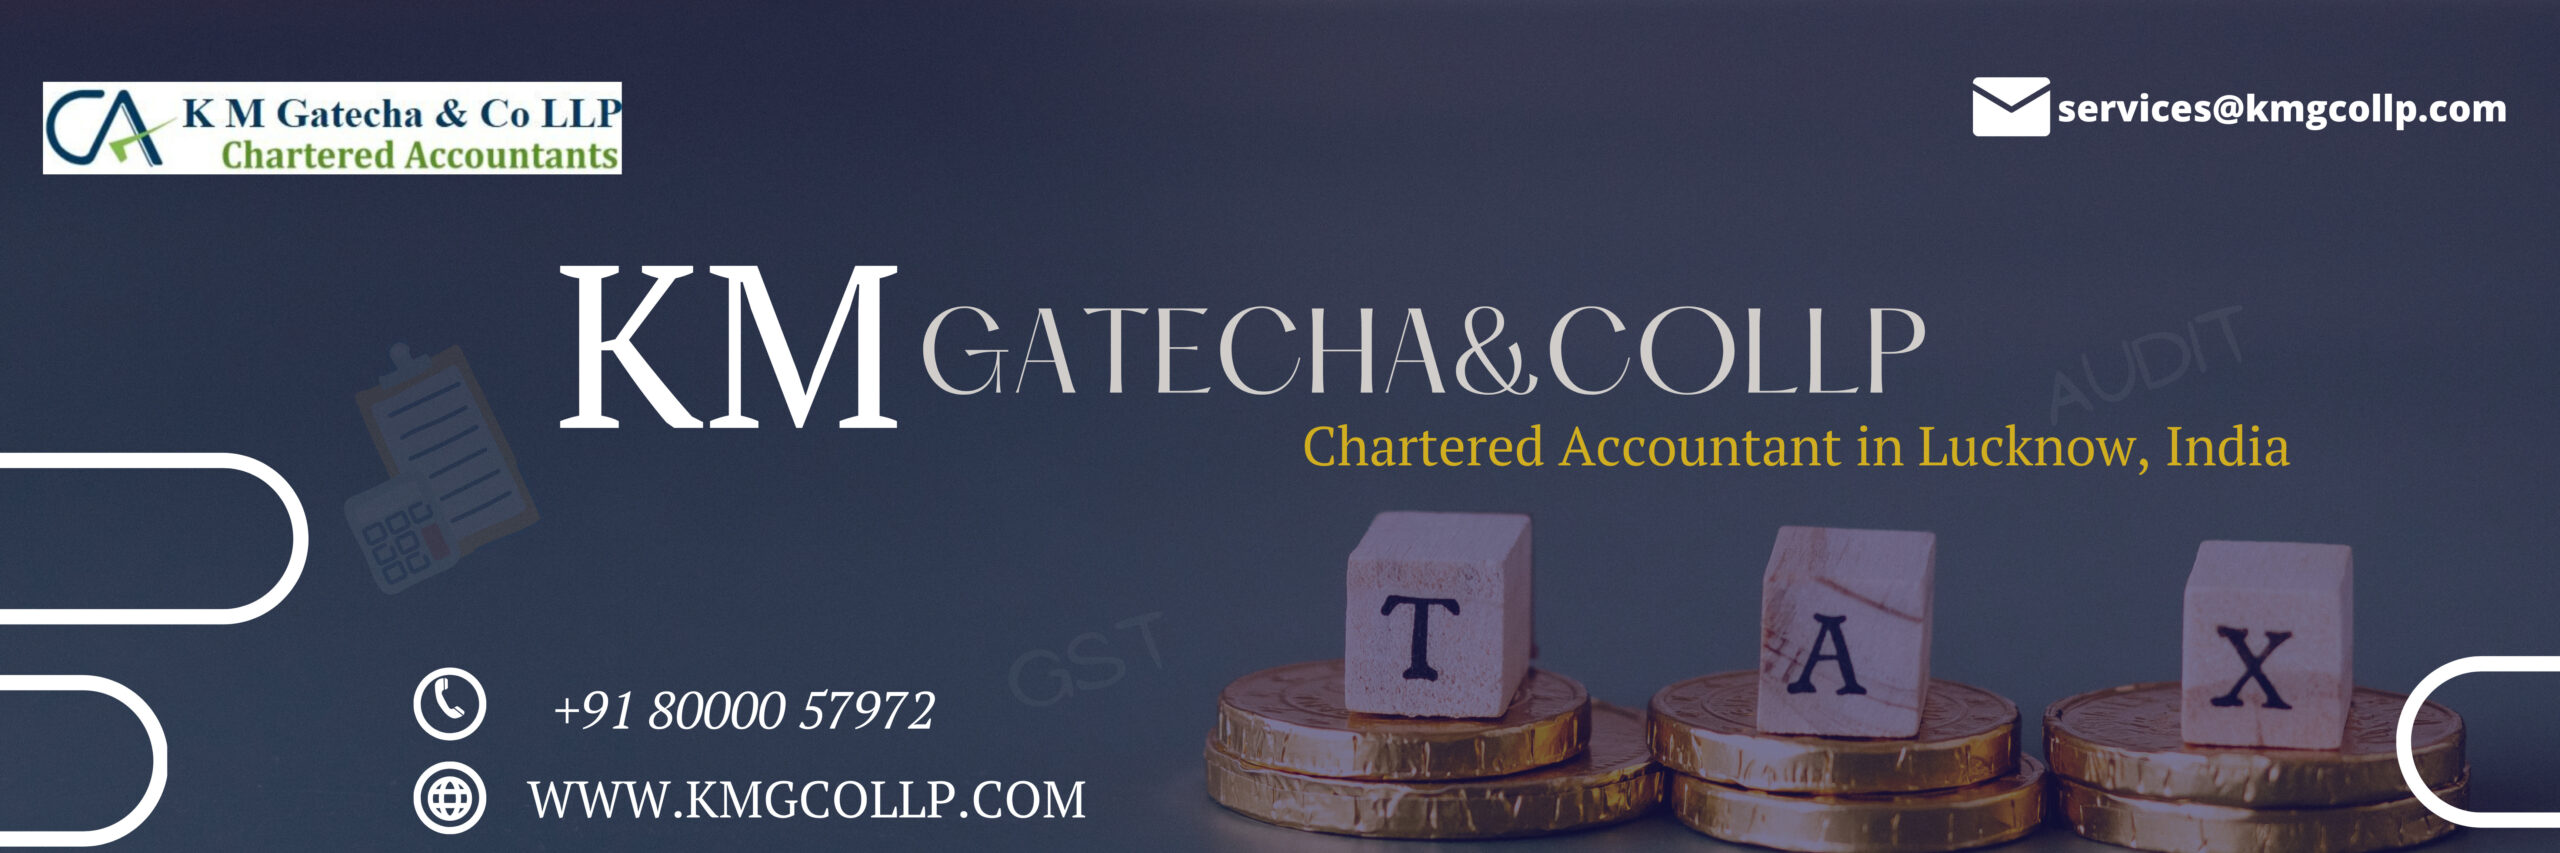 ca chartered accountant in Lucknow